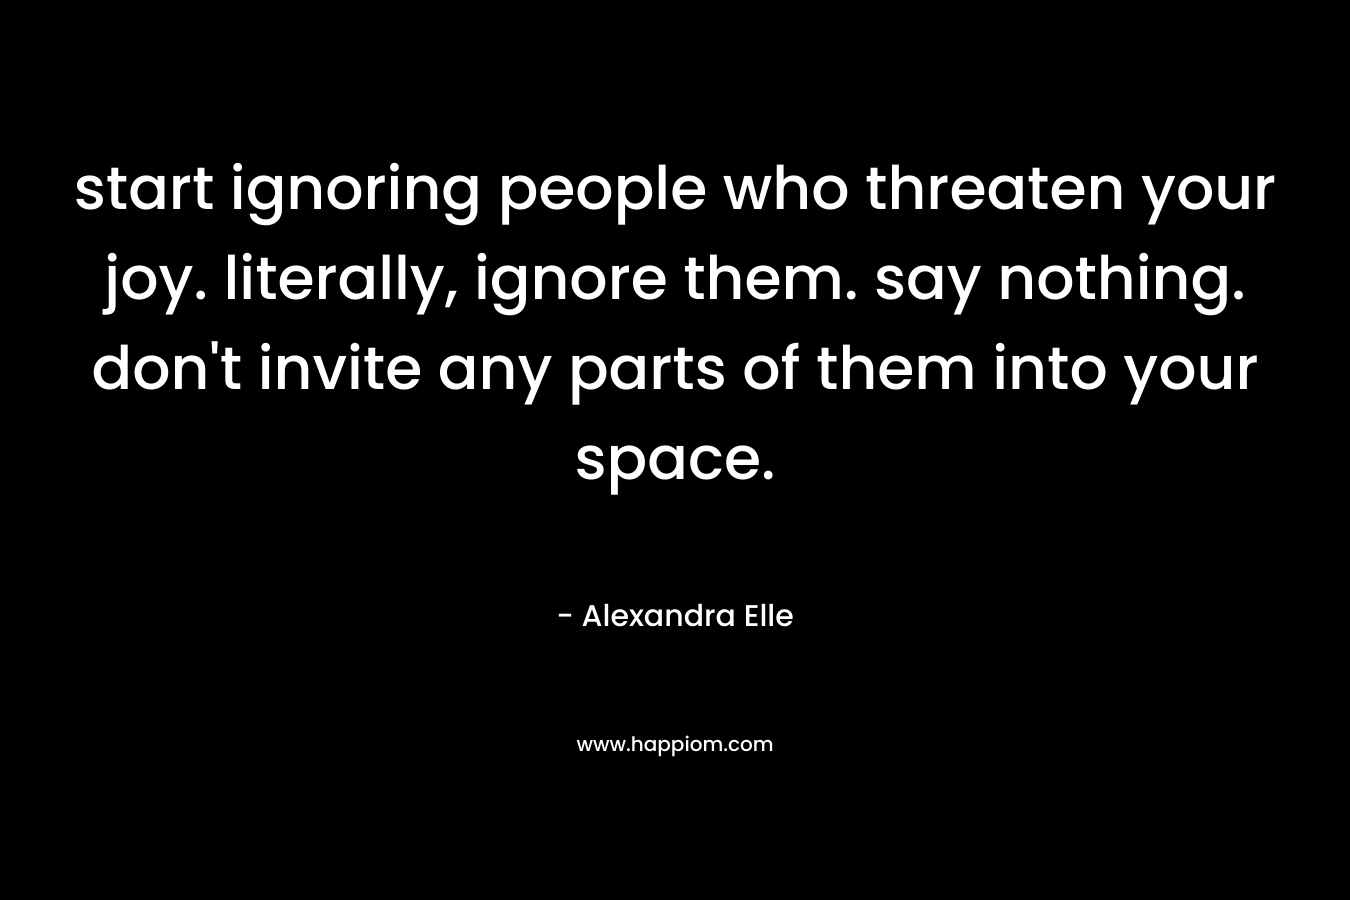 start ignoring people who threaten your joy. literally, ignore them. say nothing. don’t invite any parts of them into your space. – Alexandra Elle